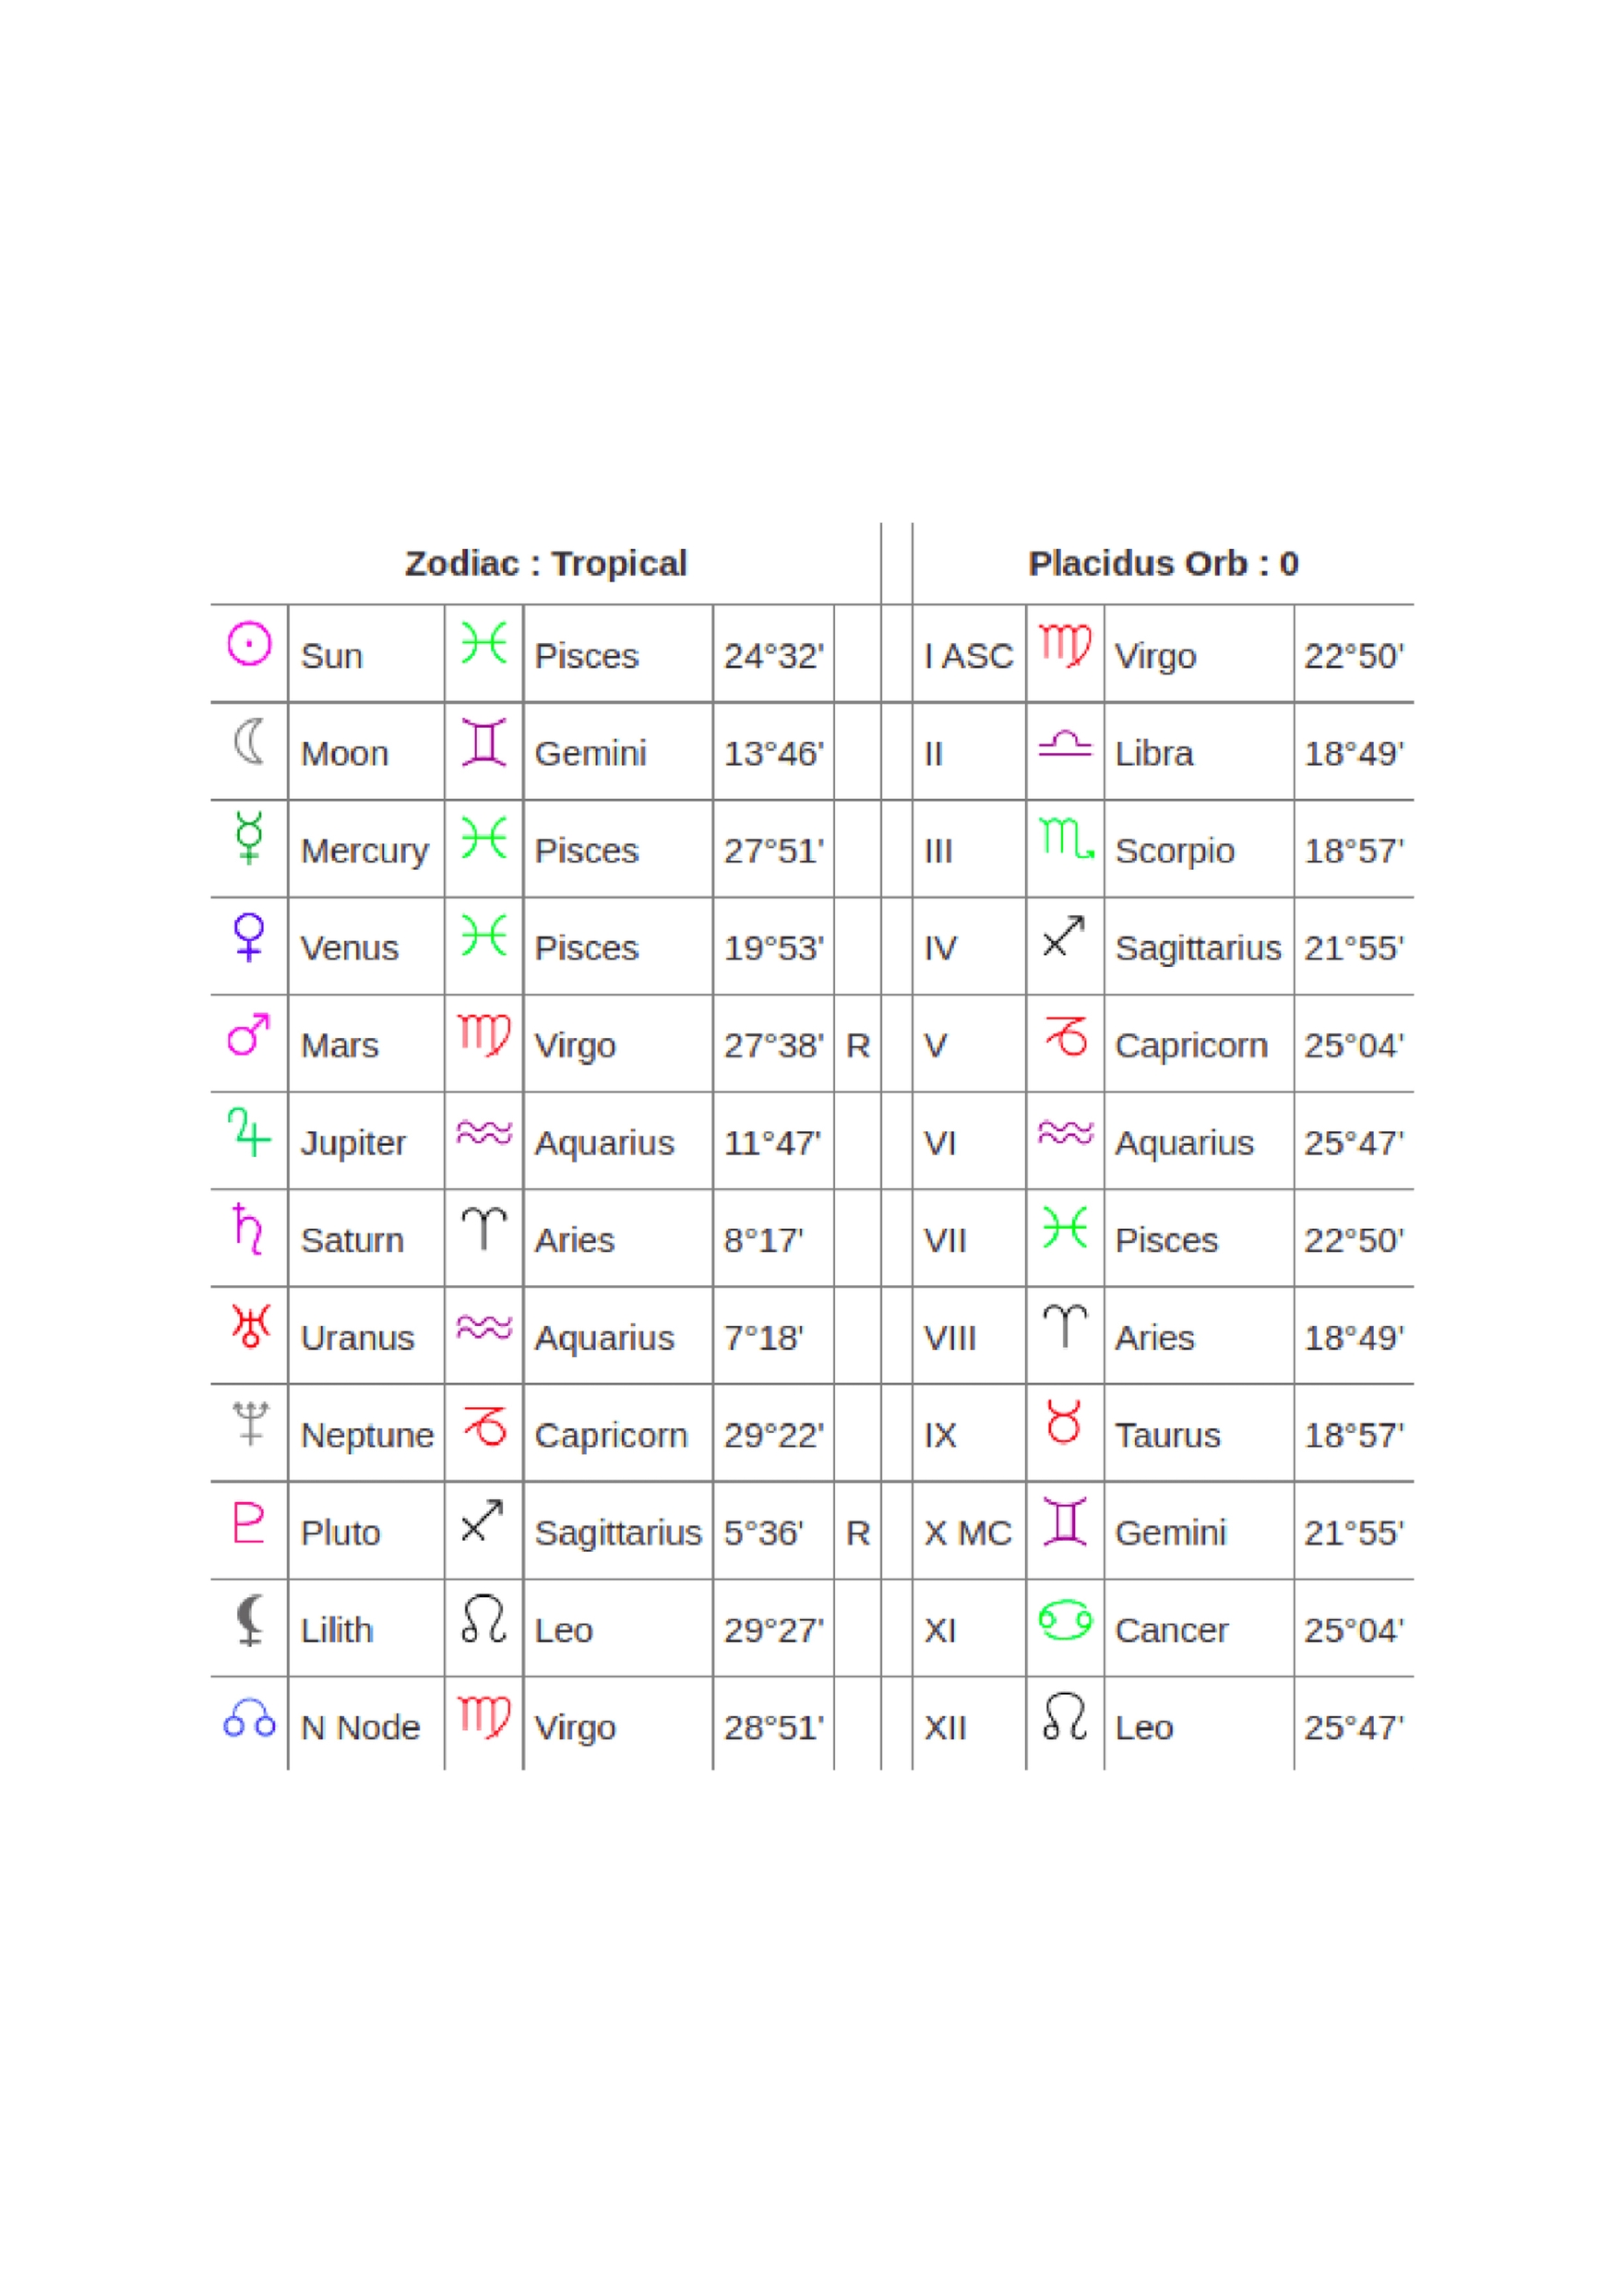 Couple Astrology Chart Template